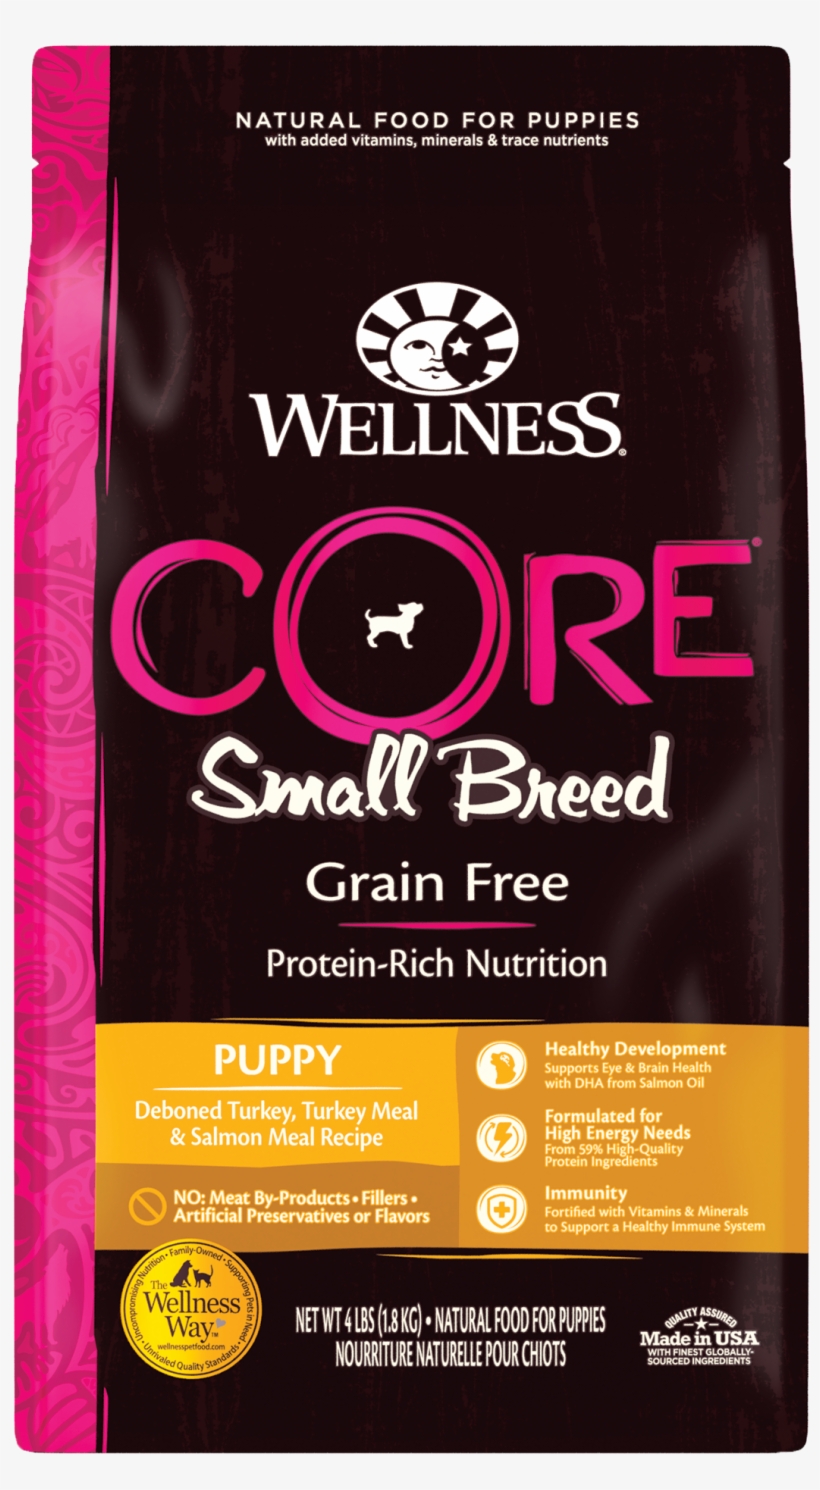 Wellness Core Small Breed Puppy Dry Dog Food - Wellness Core Small Breed Puppy, transparent png #1122202